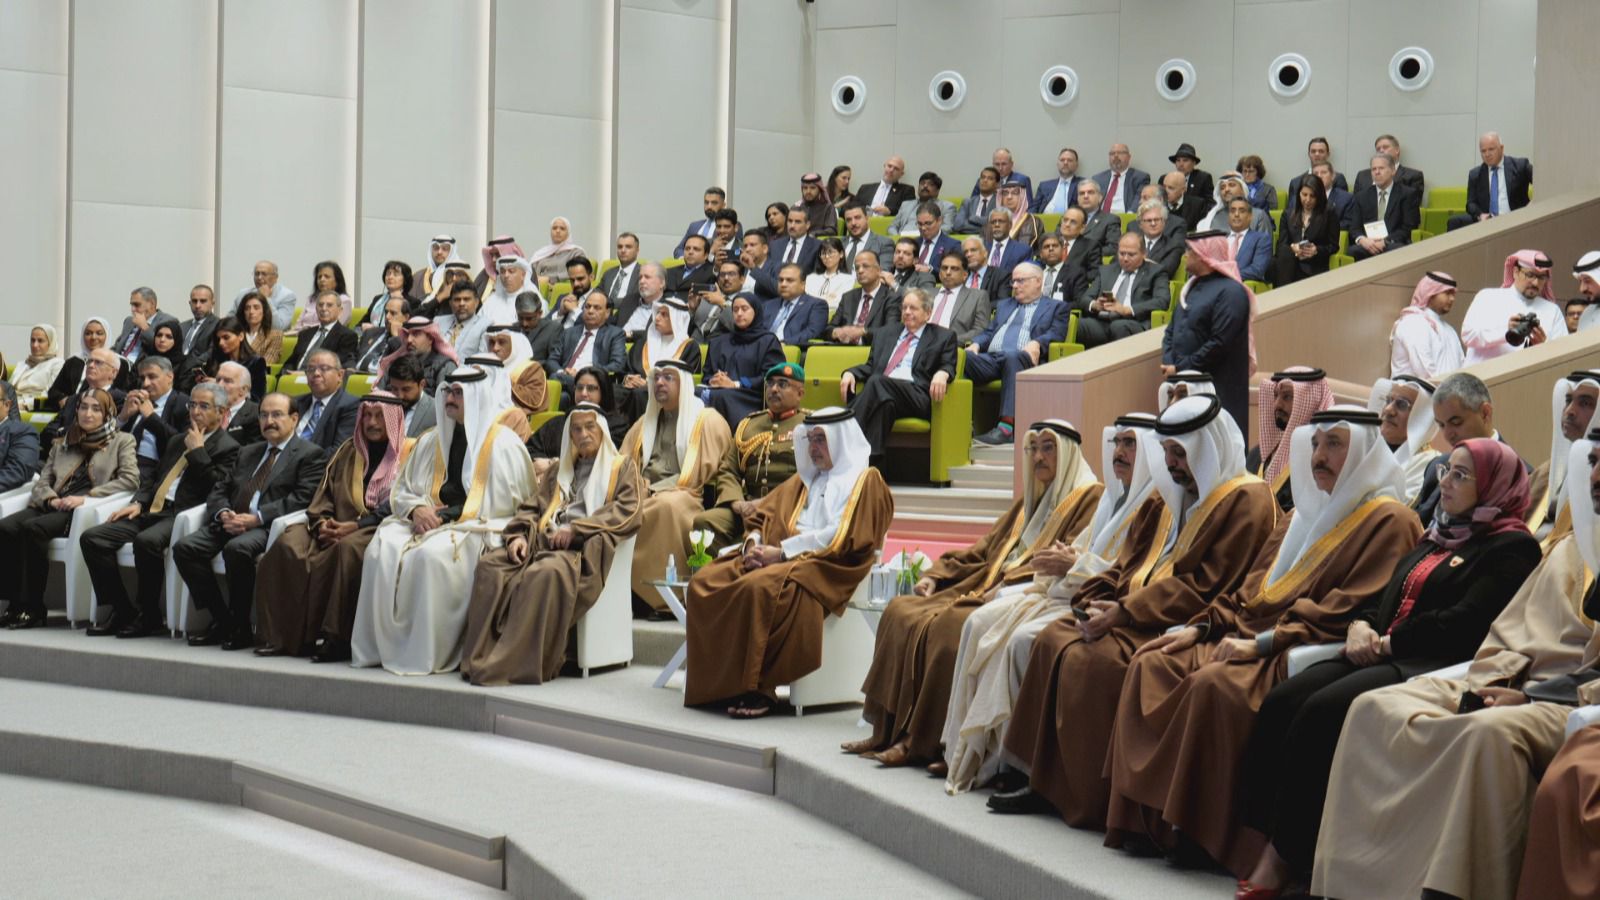 The audience at the inauguration of King Hamad American Mission Hospital in Manama, Bahrain. Photo courtesy of Sheba Medical Center